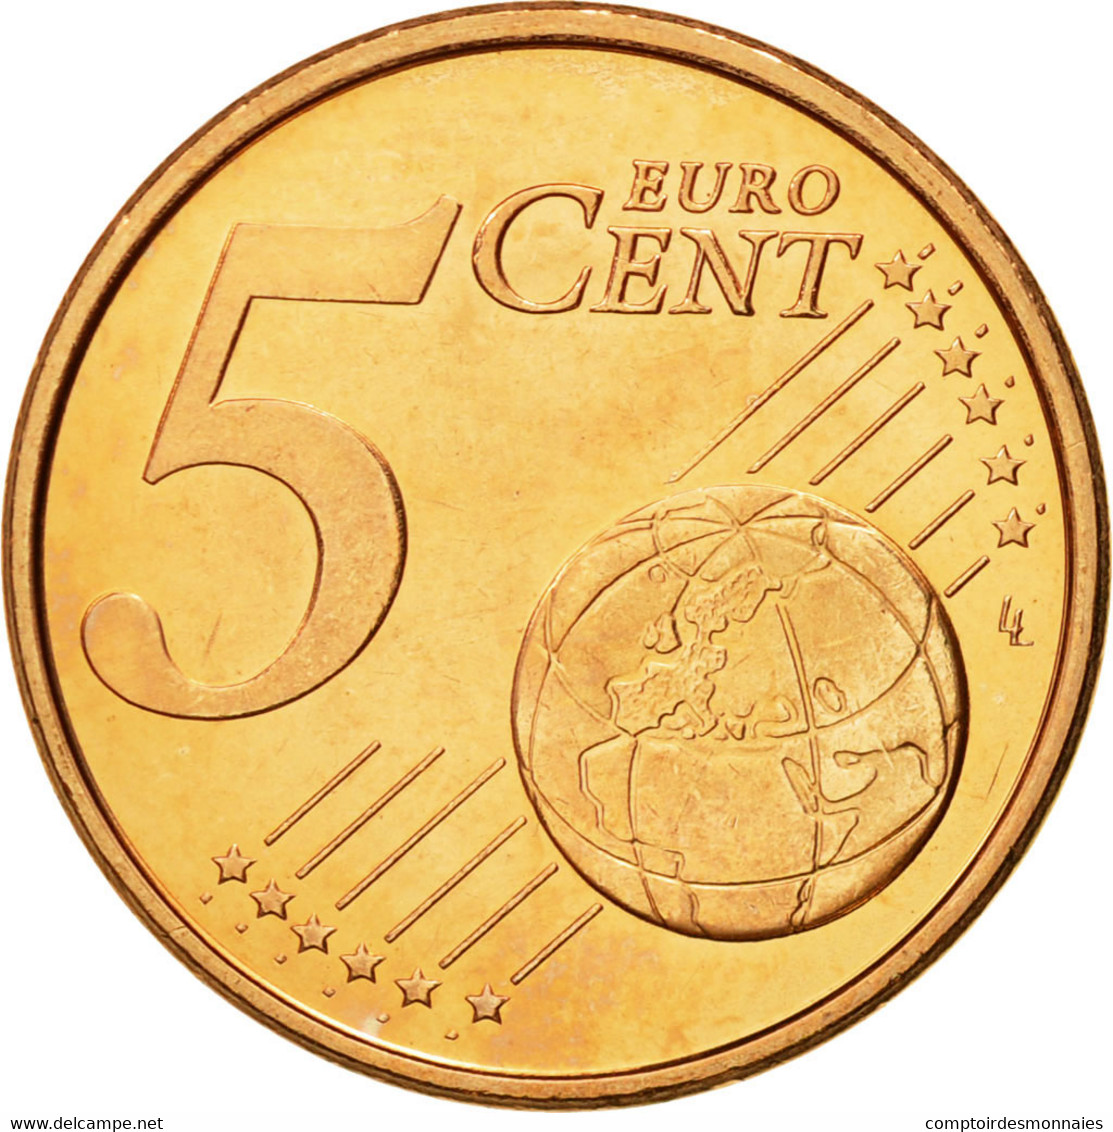 Chypre, 5 Euro Cent, 2009, FDC, Copper Plated Steel, KM:80 - Chypre